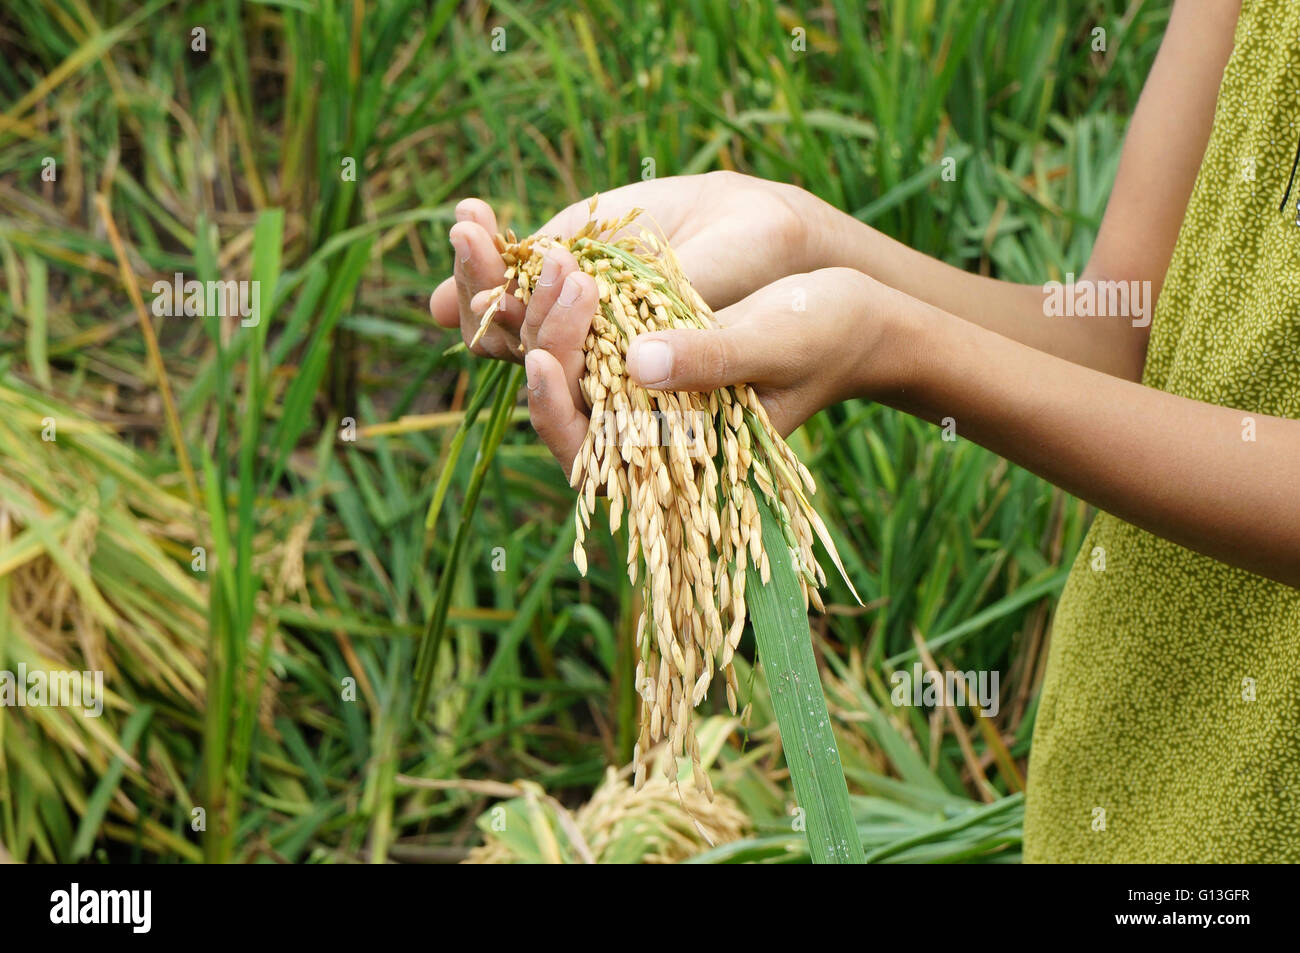 World food security, a global problem, famine at africa, children need to help, poor people need food, kid hand on rice field Stock Photo